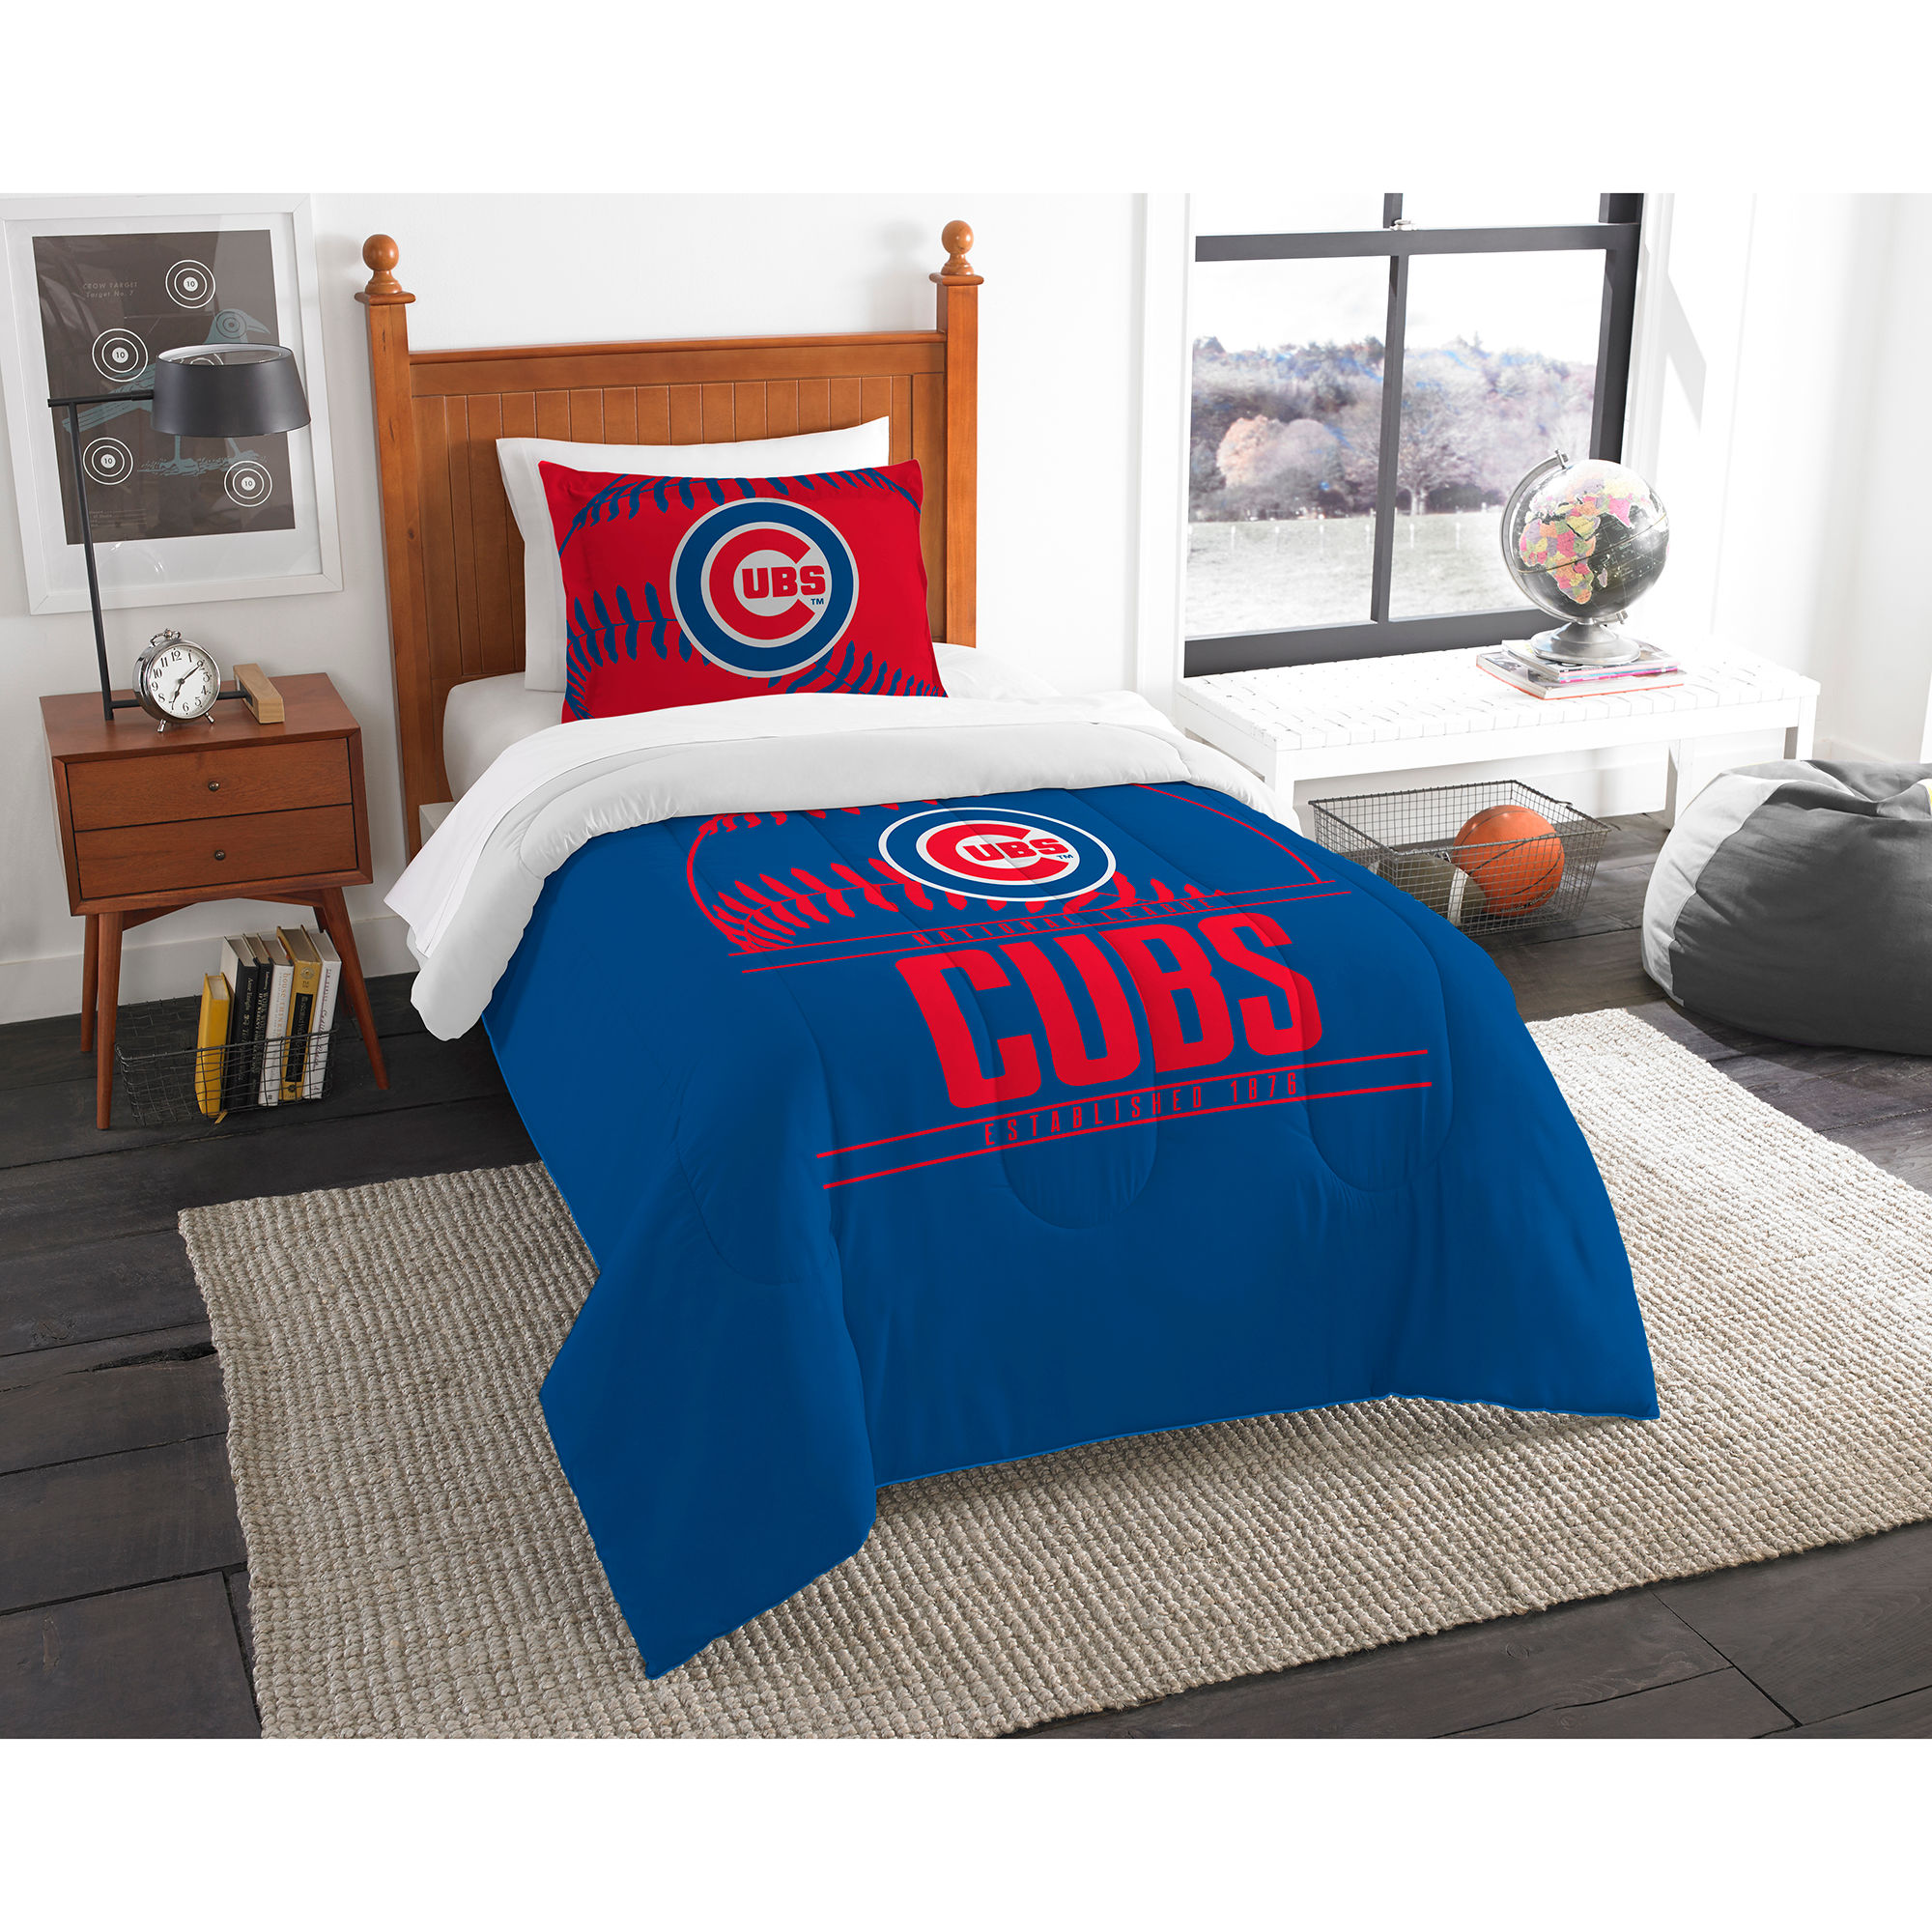 Chicago Cubs Bedding